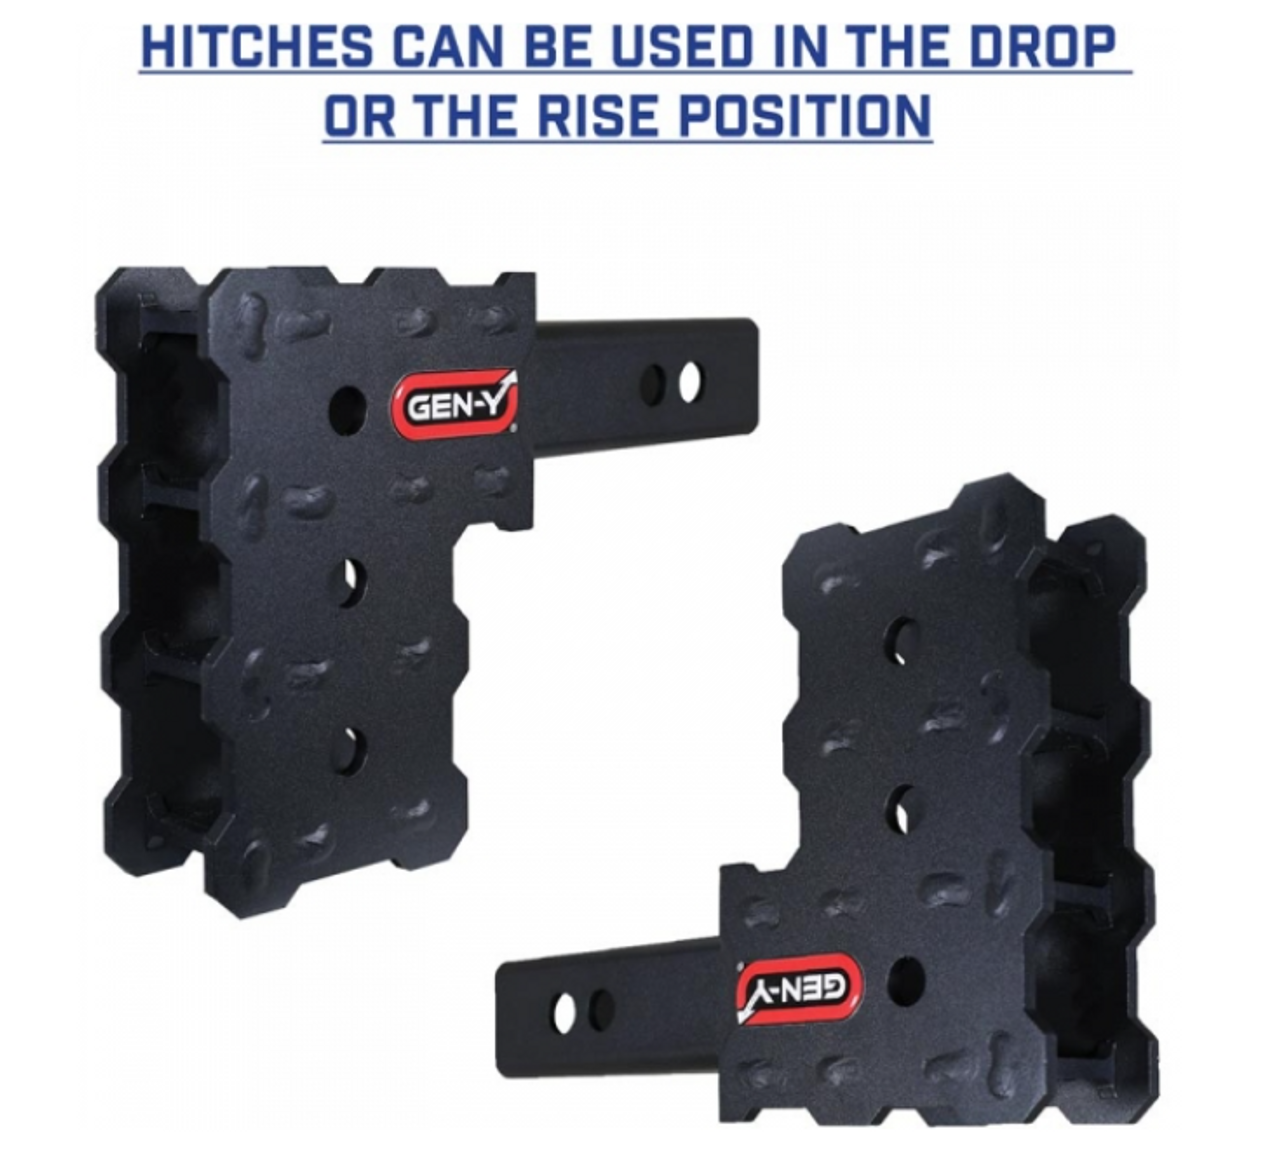 GEN Y Hitch Phantom X 7K Drop Hitch 4.5" Offset (Universal 2" Hollow Shank| 7,000 LB Towing Capacity) 700 LB Tongue Weight (GH-13104X)-Drop and Rise View